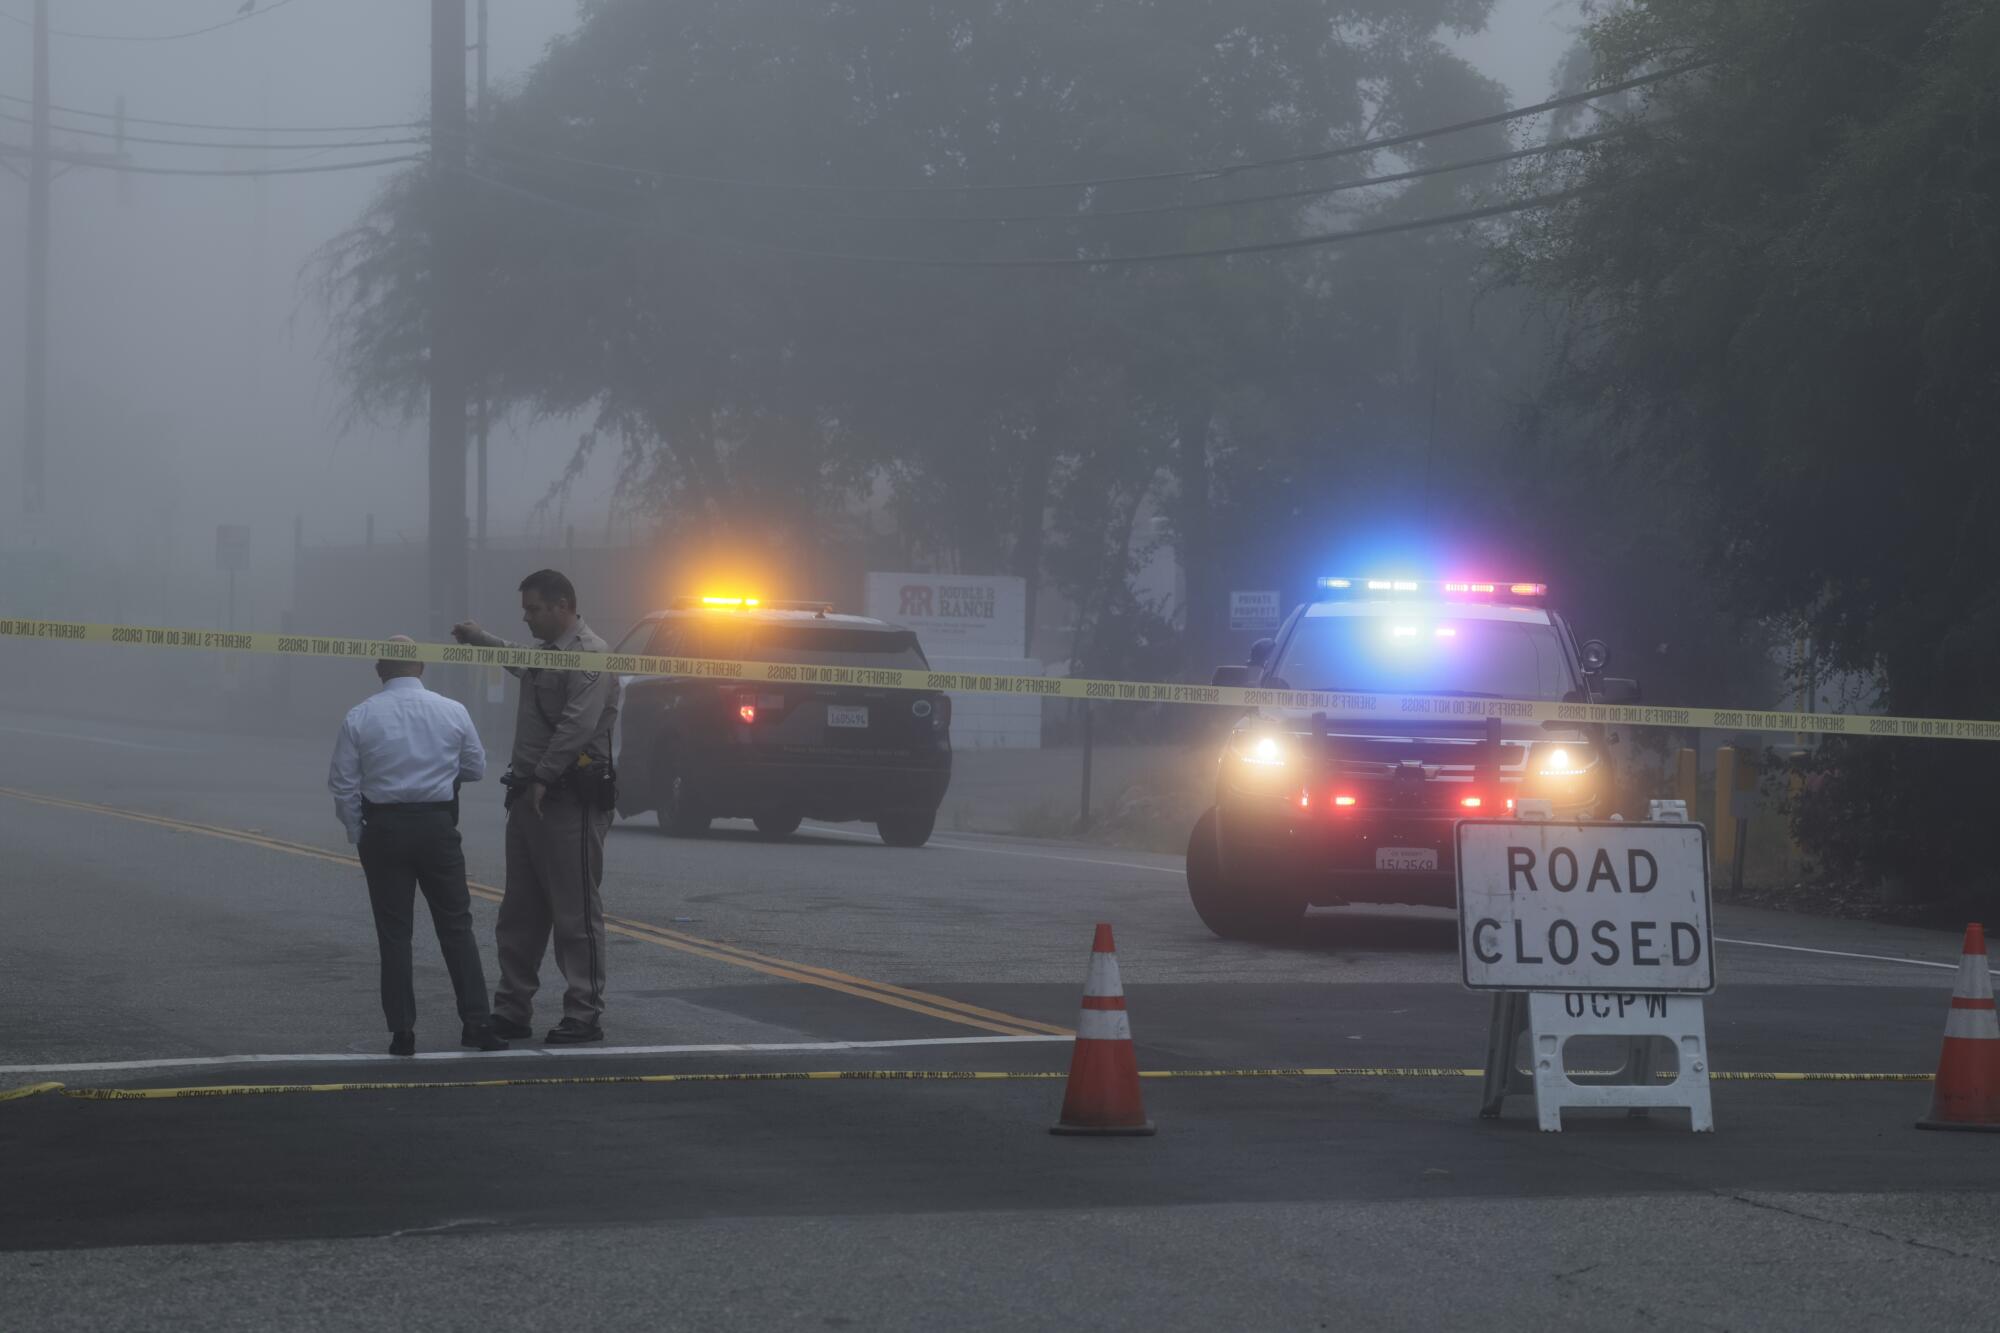 Fog blankets a roadway on which law enforcement vehicles are parked.